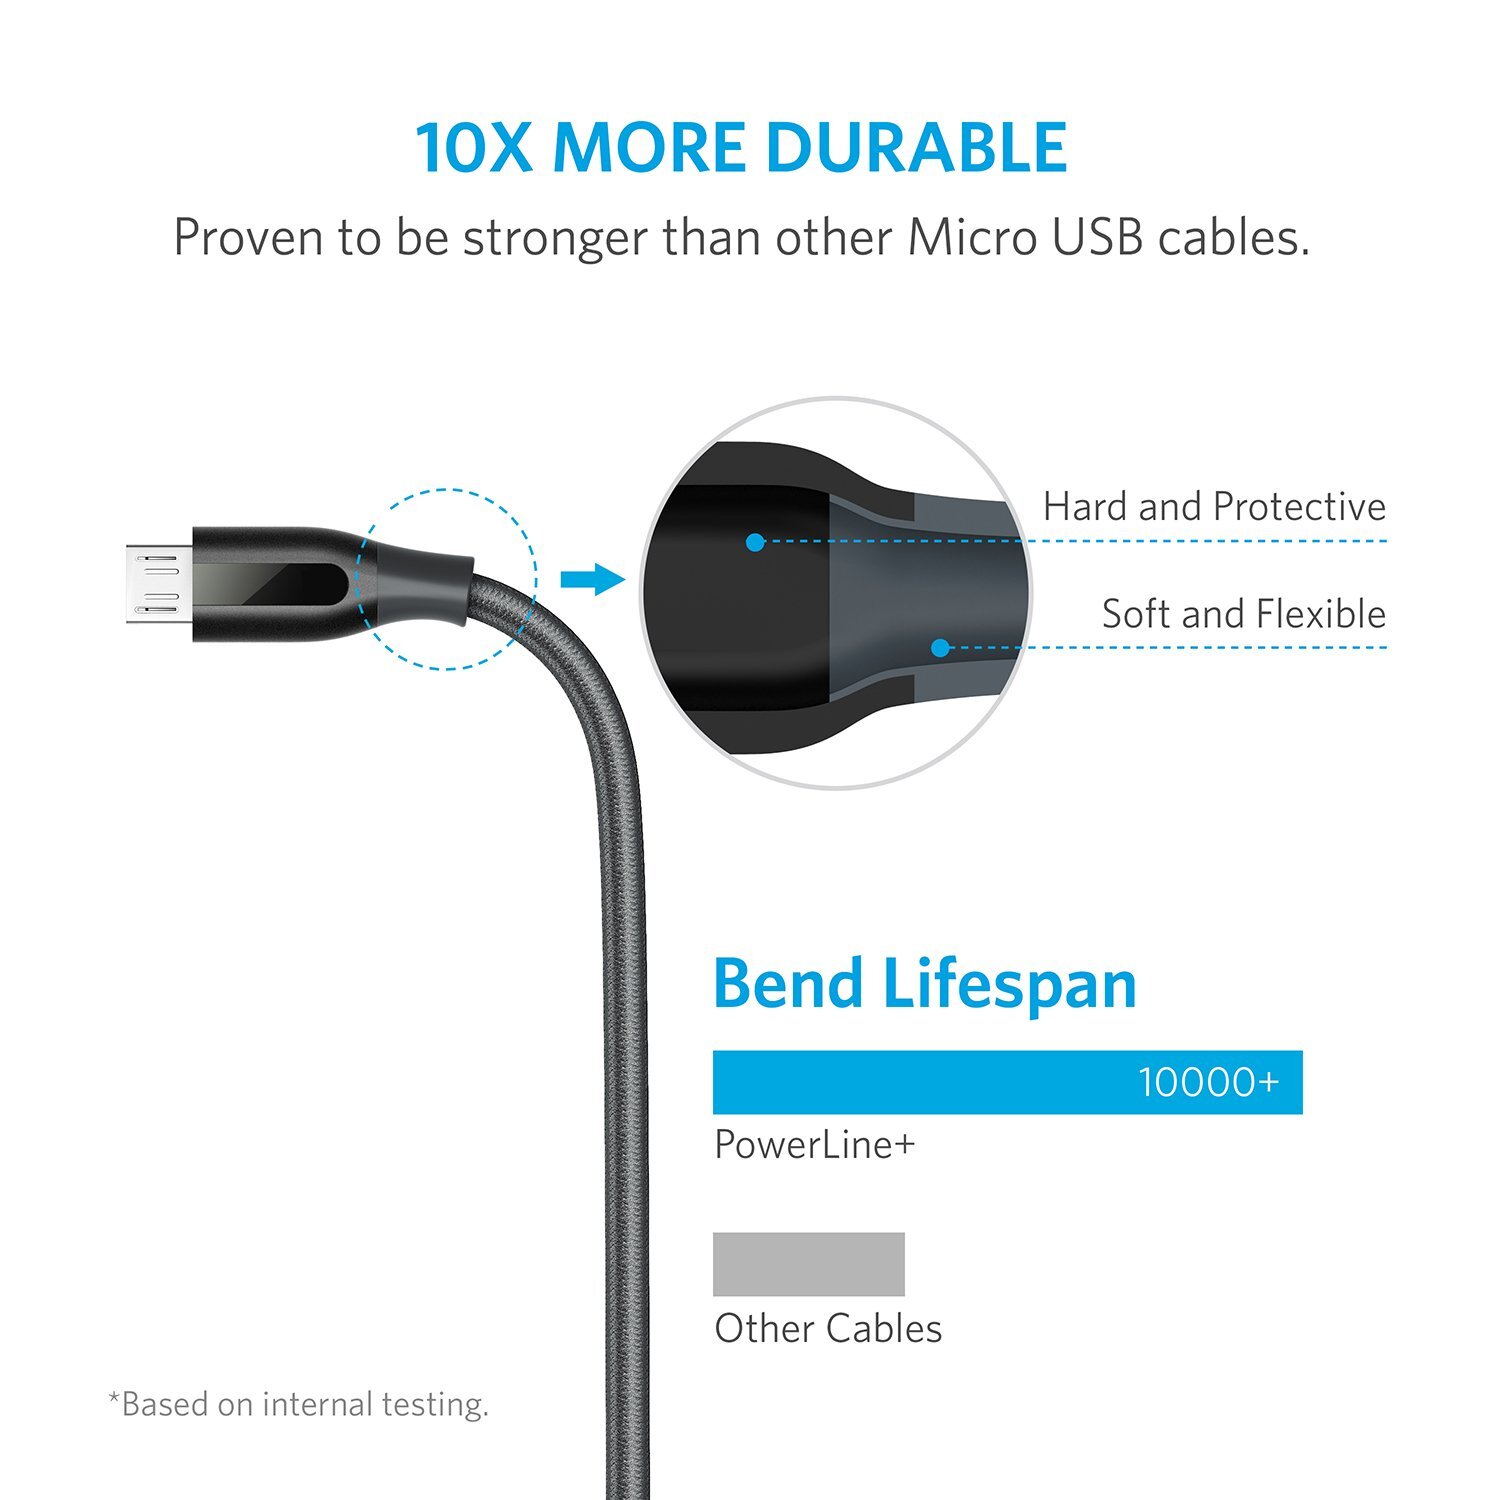 Anker Cable Powerline+ Micro USB 3ft, Double Braided Nylon, for Samsung, Nexus, LG, Motorola, Android Smartphones-M000000000445 www.mysocially.com